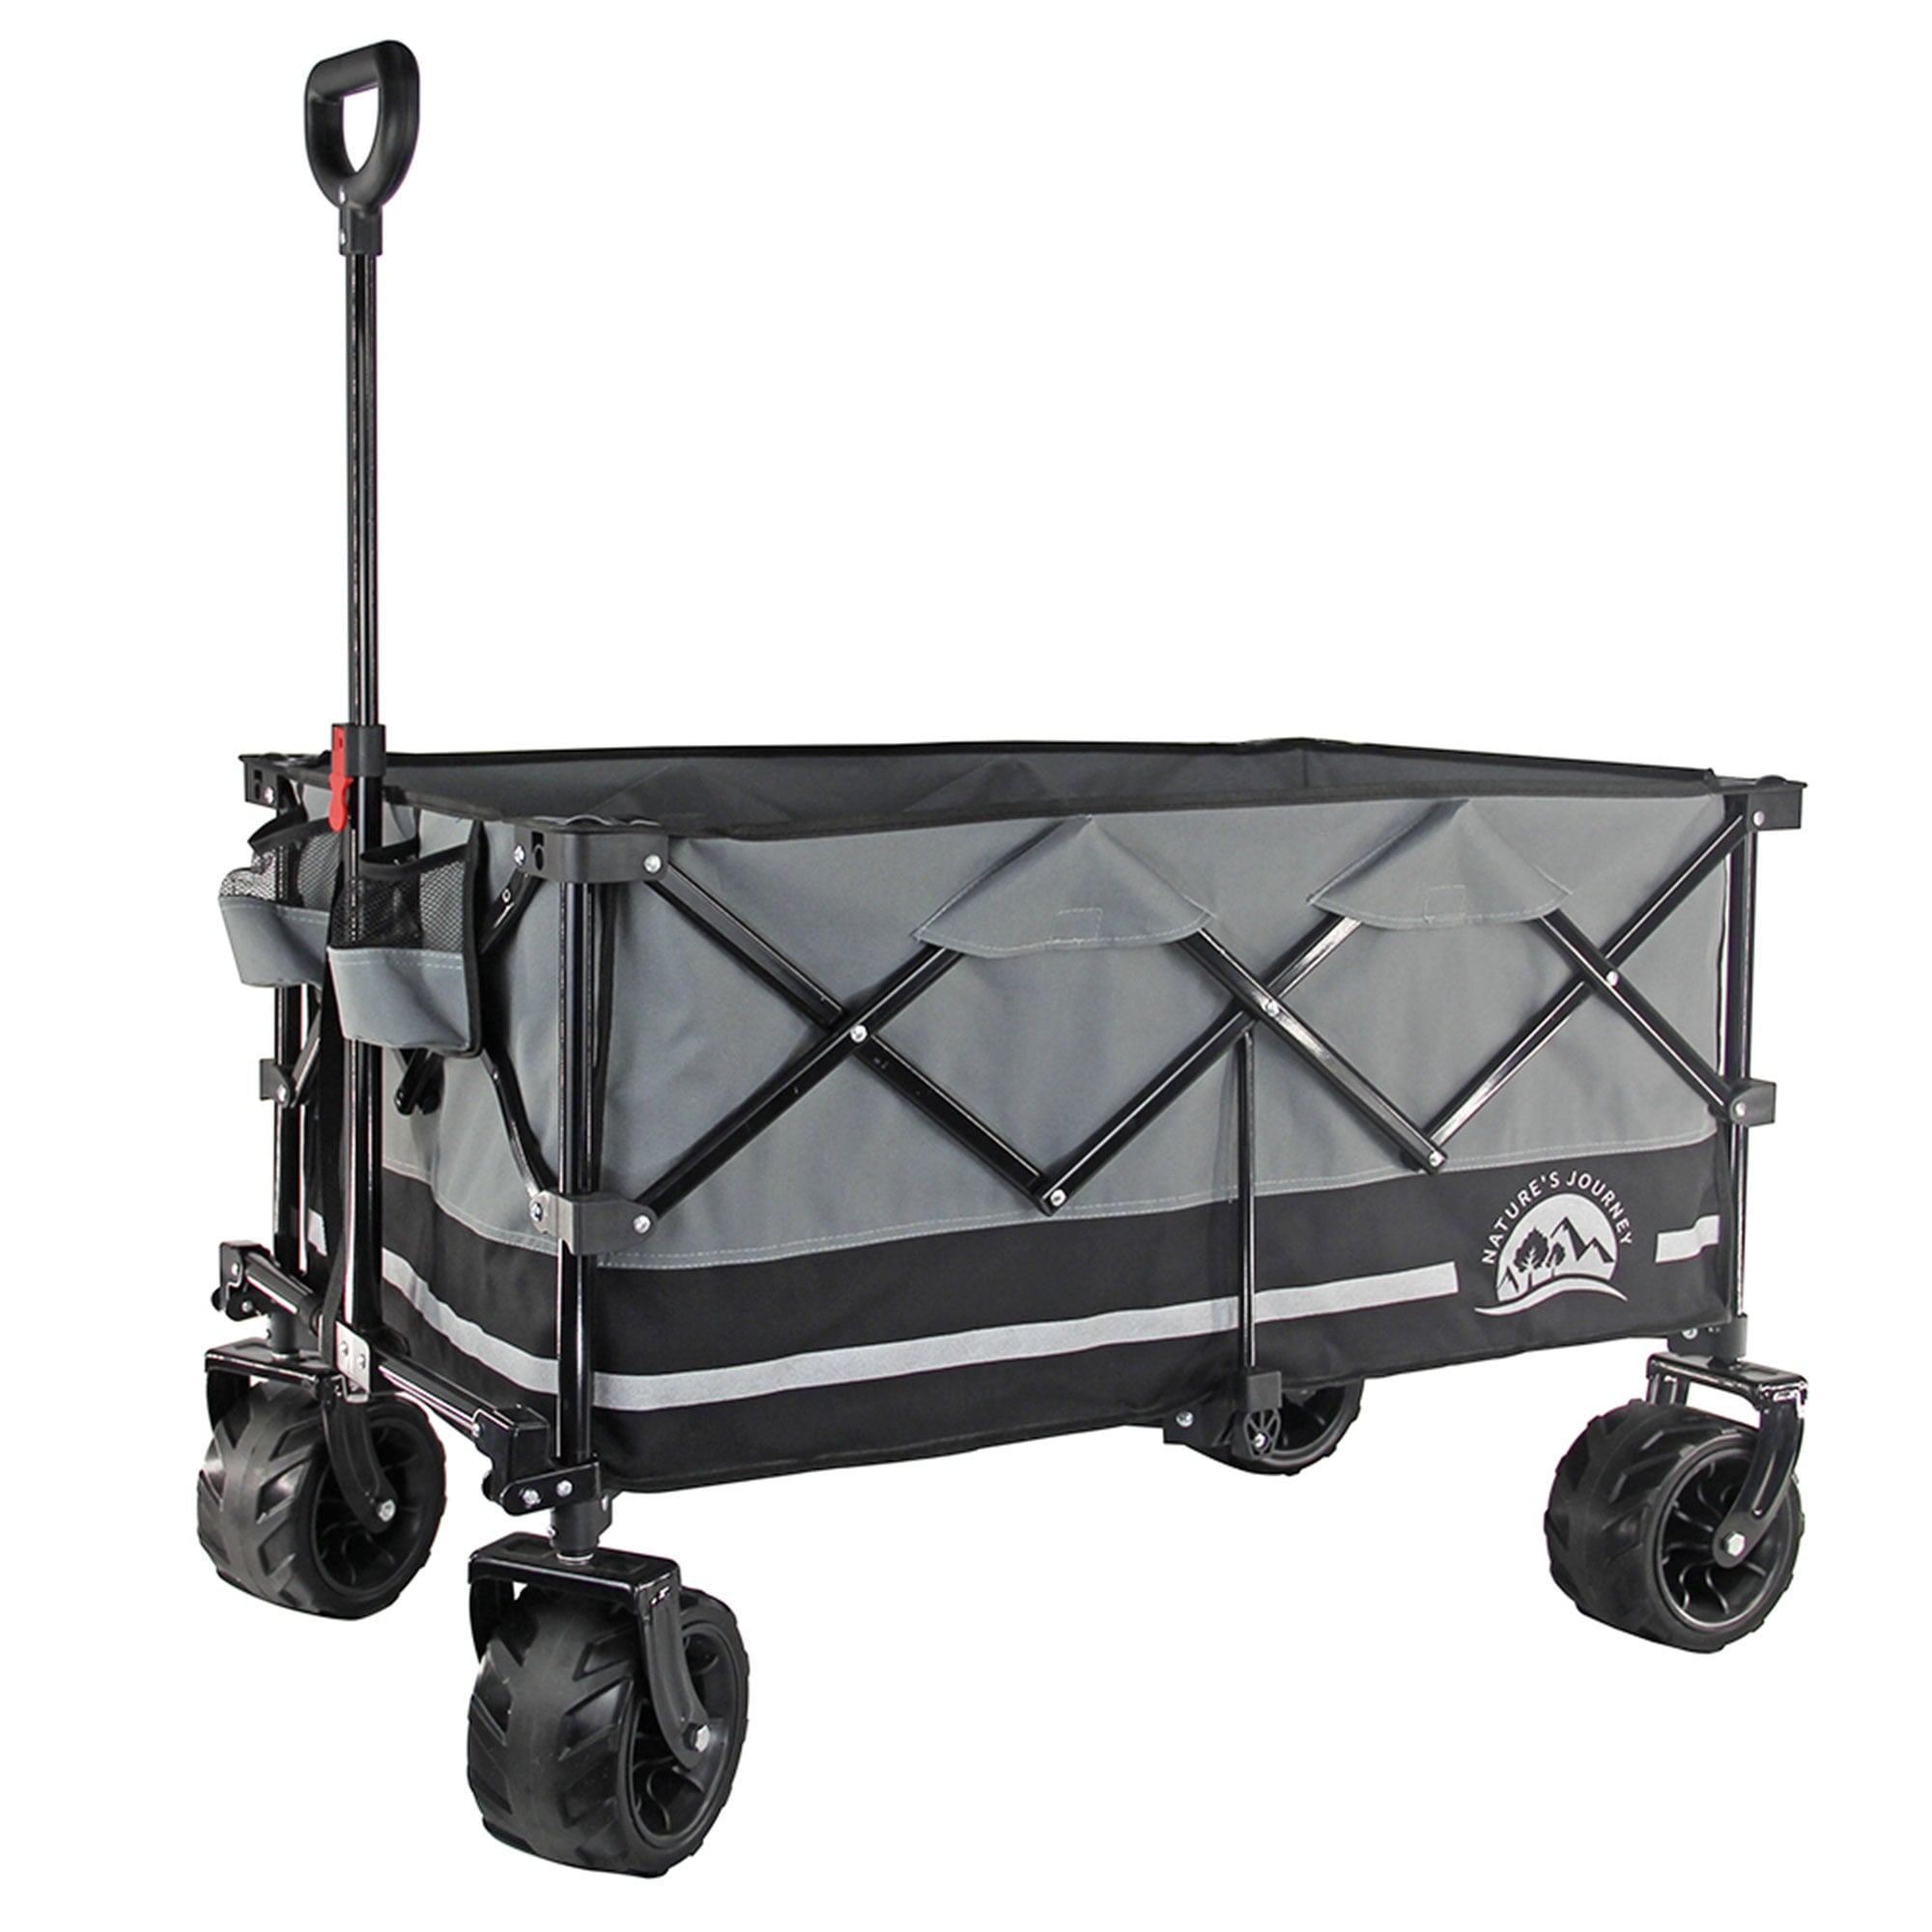 Maxwell Outdoors Folding Camping Wagon with More Silence Wheels， Black